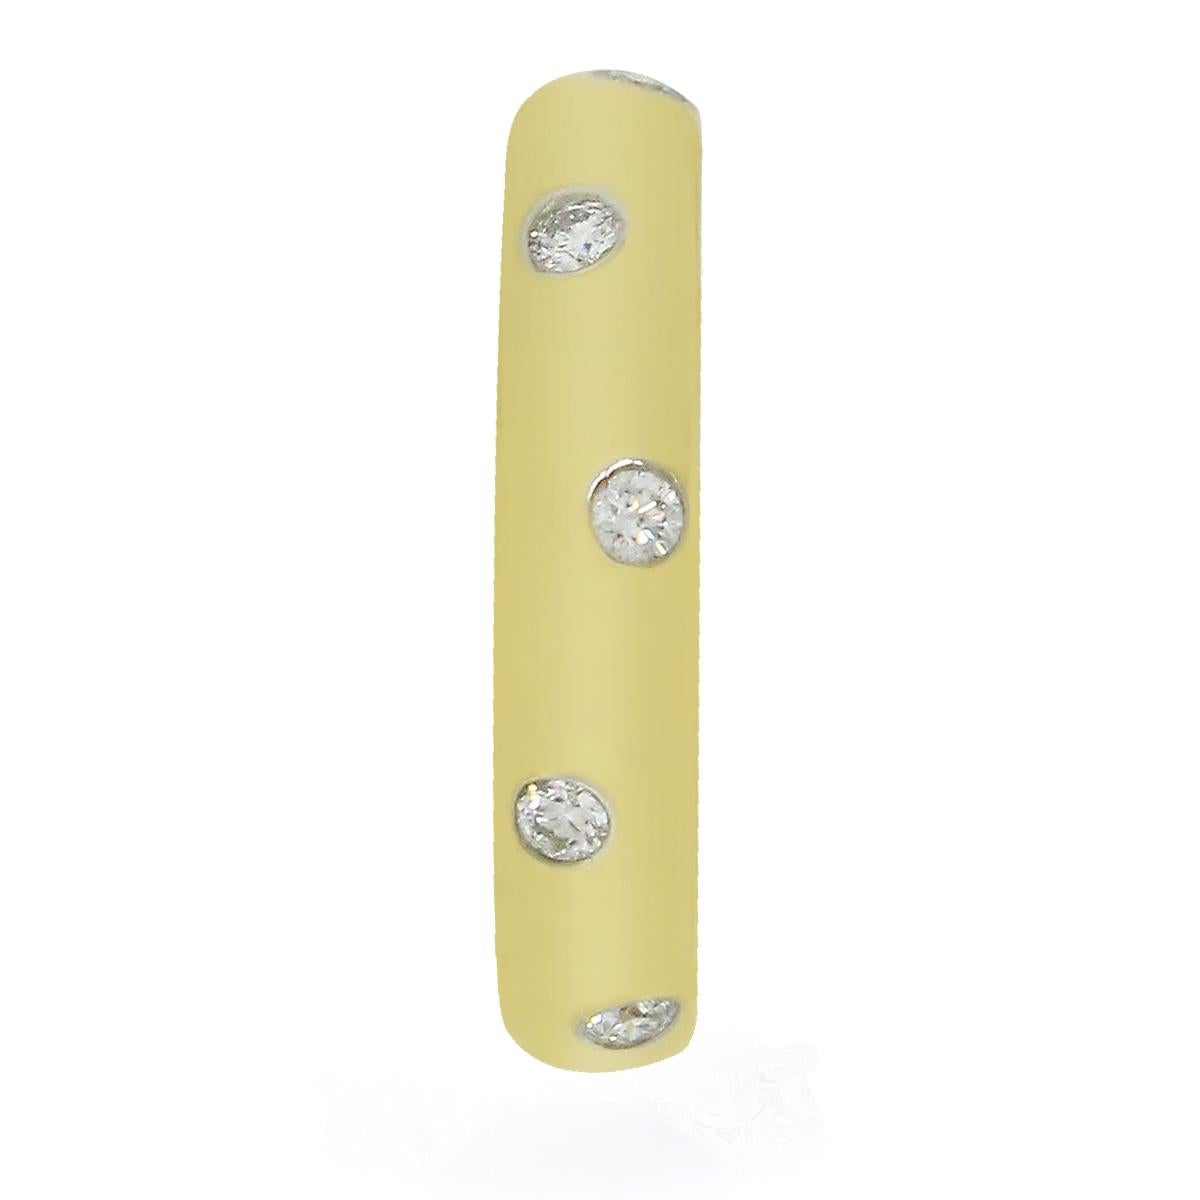 Brand: Tiffany & Co.
Material: 18k Yellow Gold
Diamond Details: Approximately 0.22ct diamonds. Diamonds are H/G in color and VS1-VS2 in clarity.
Ring Size: 6
Total Weight: 4.8g (3.1dwt)
Measurements: 0.79